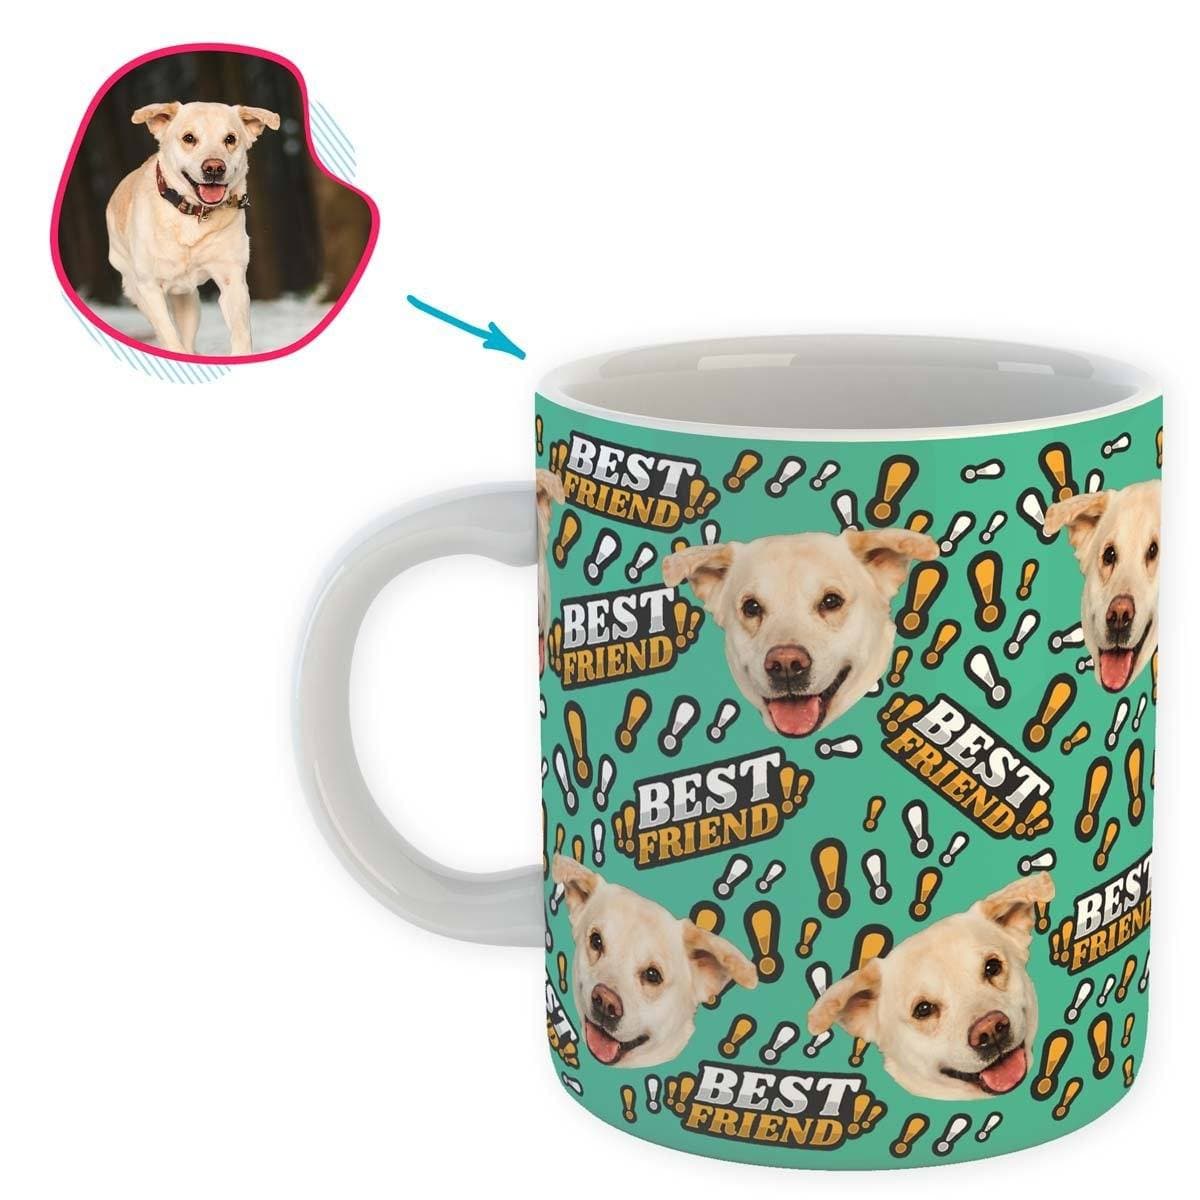 mint Best Friend mug personalized with photo of face printed on it